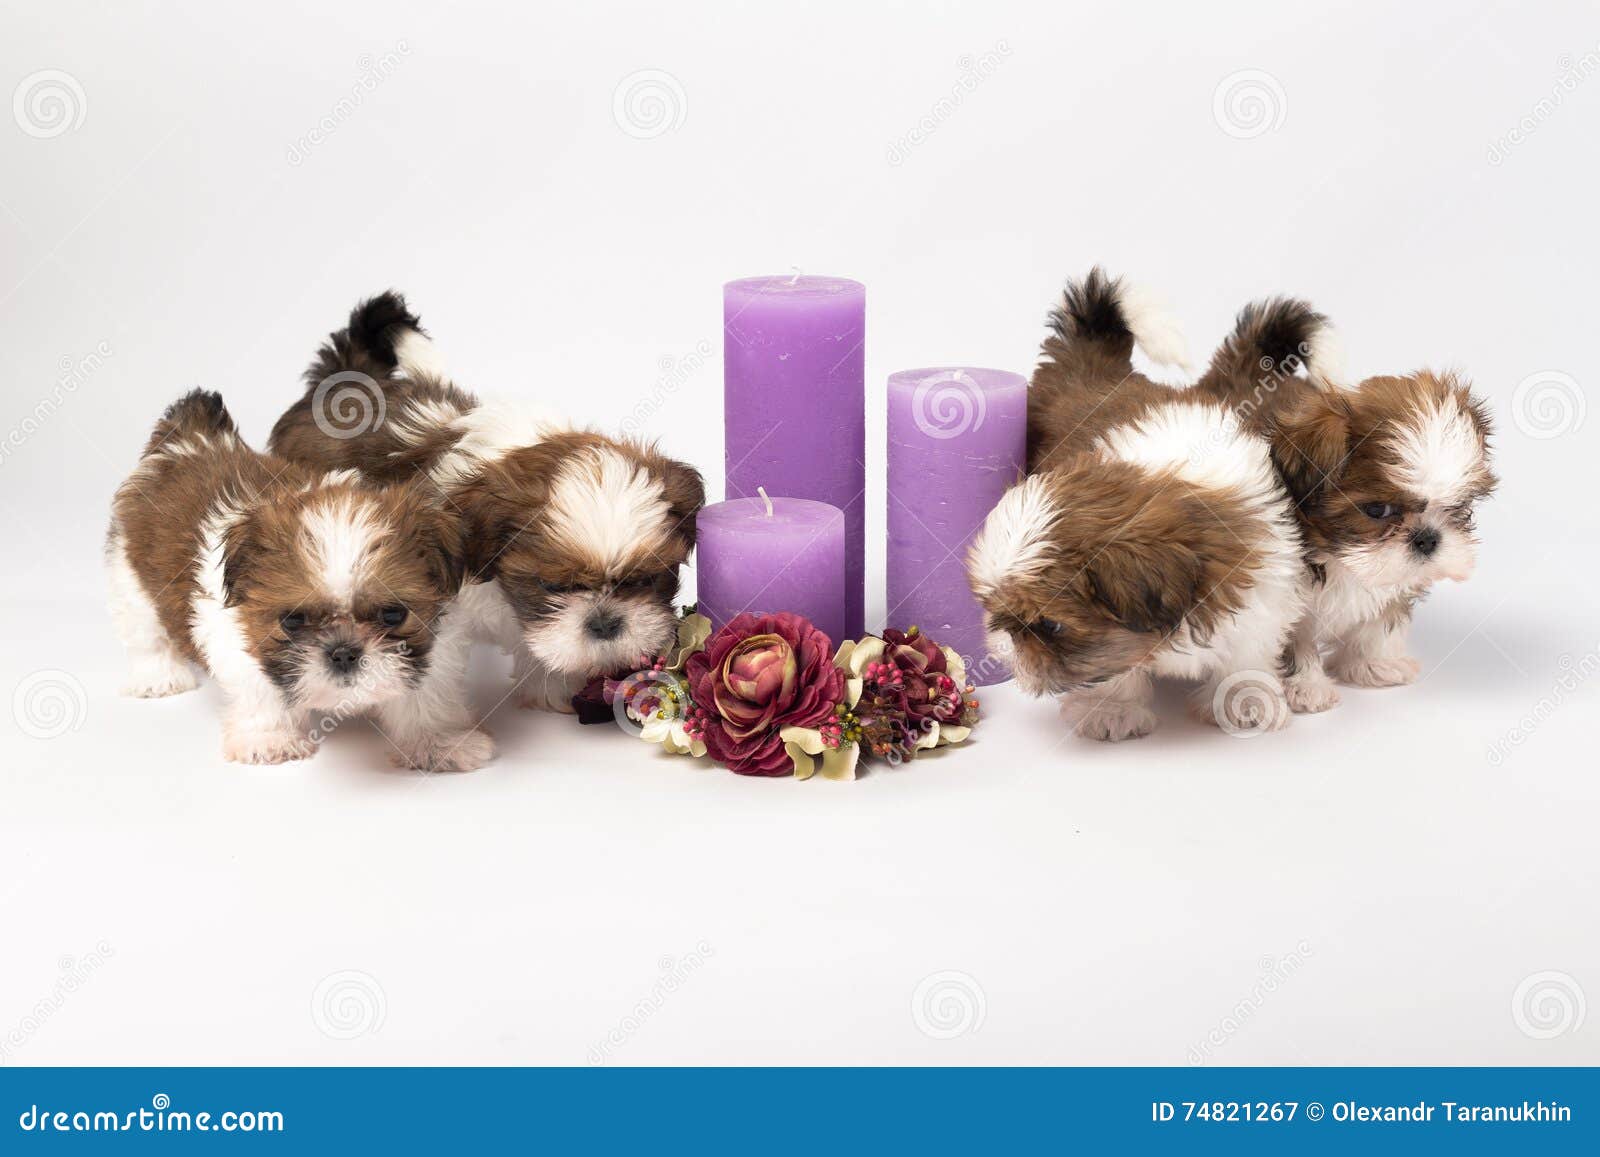 five cute shih-tzu puppies with holliday candles